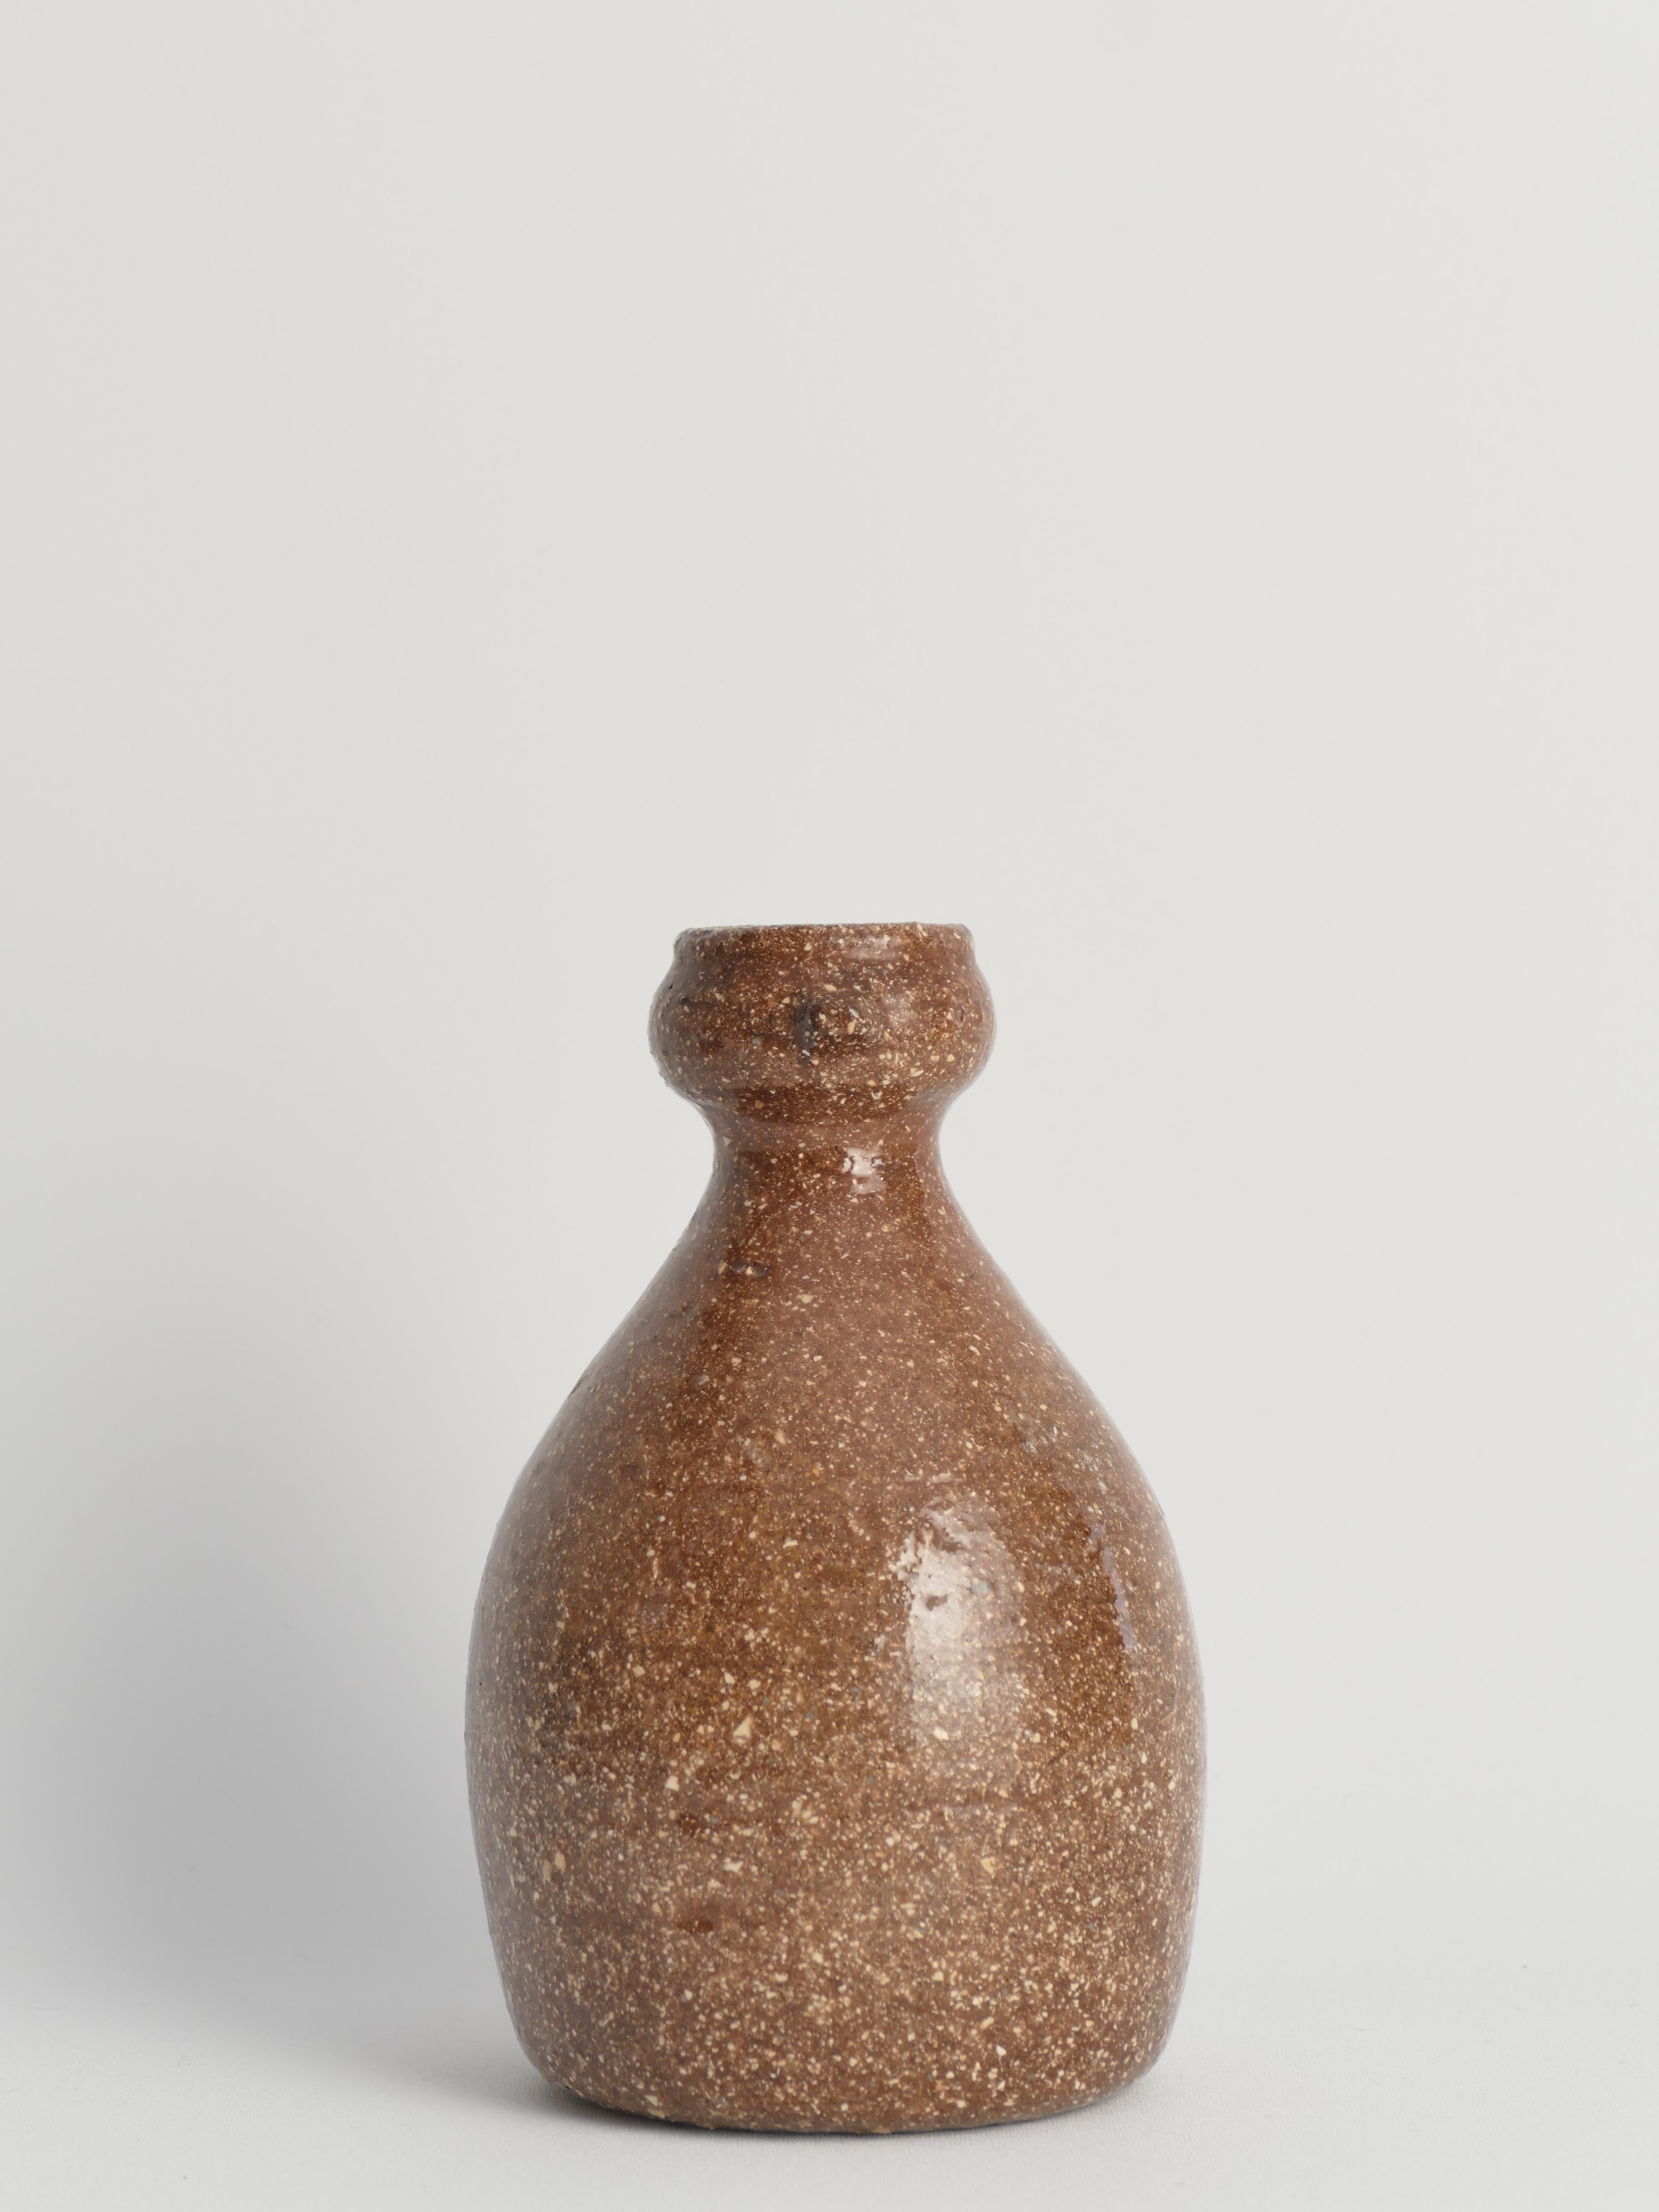 Japanese Shigaraki Inspired Handmade Stoneware Vase with Barnacle-Like Texture In Good Condition For Sale In Grythyttan, SE